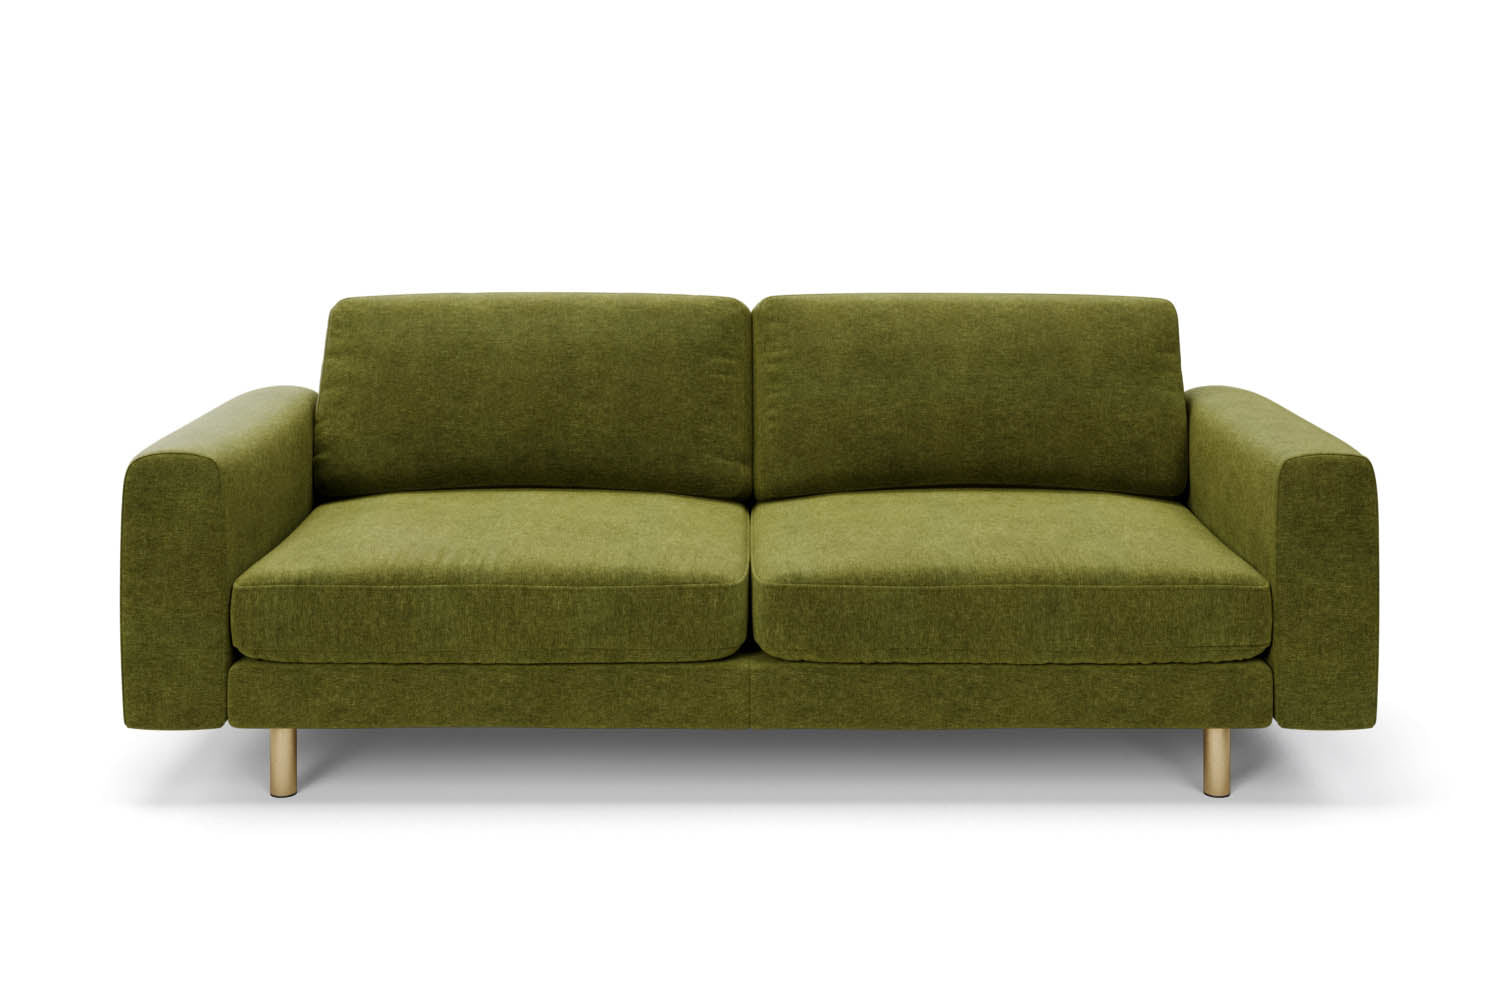 The Big Chill 3 Seater Sofa in Moss Chenille with metal legs front variant_40886288285744